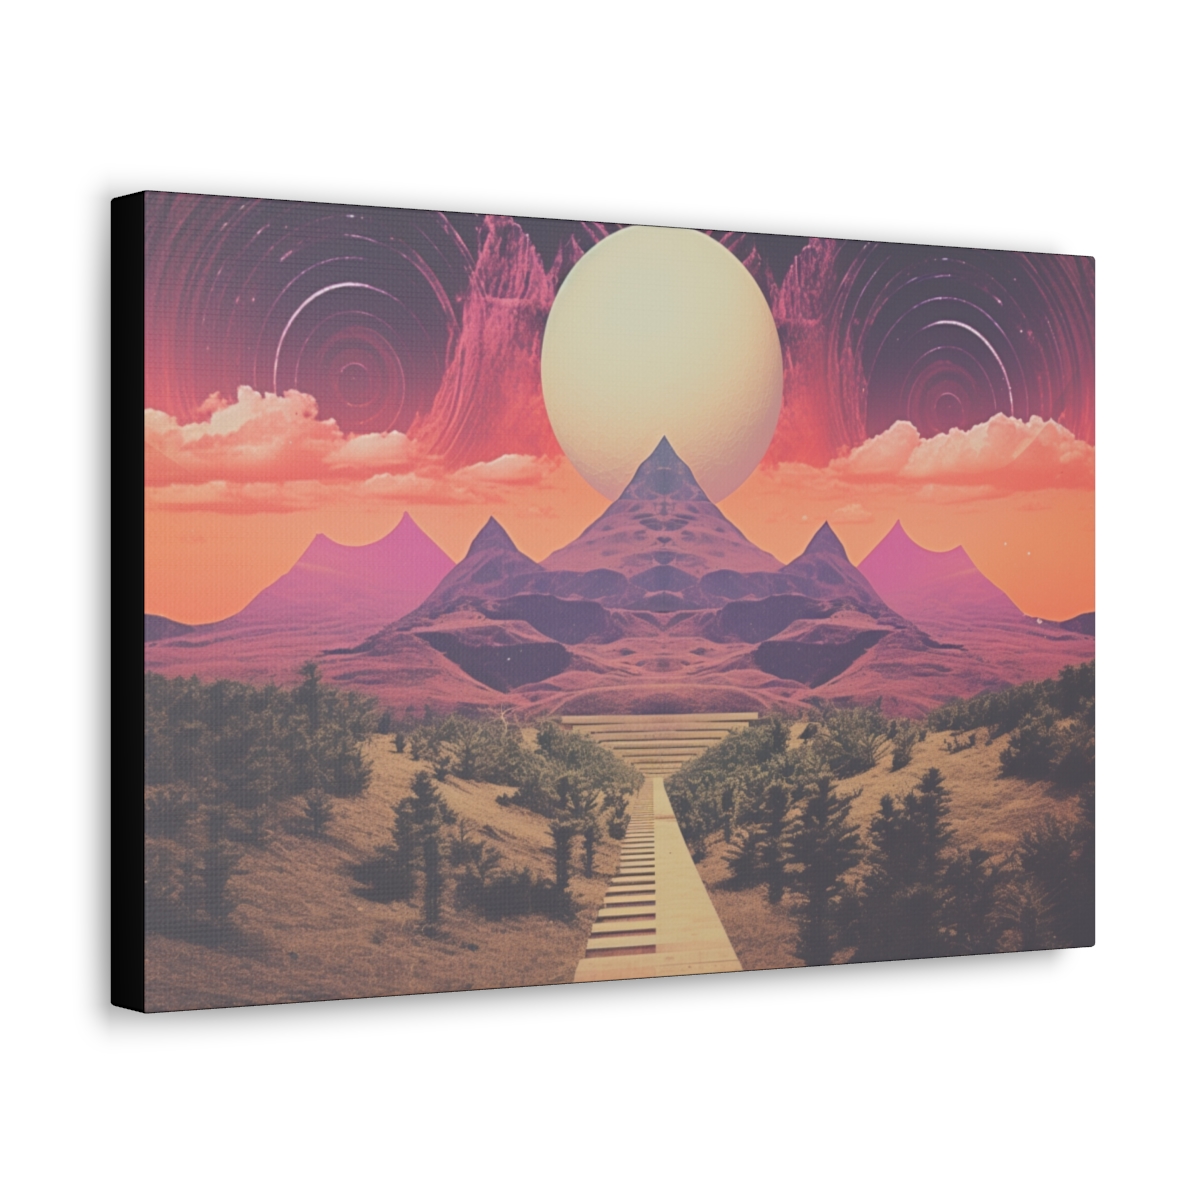 Ethereal Dreamy Art Canvas Print: Roads Uncharted